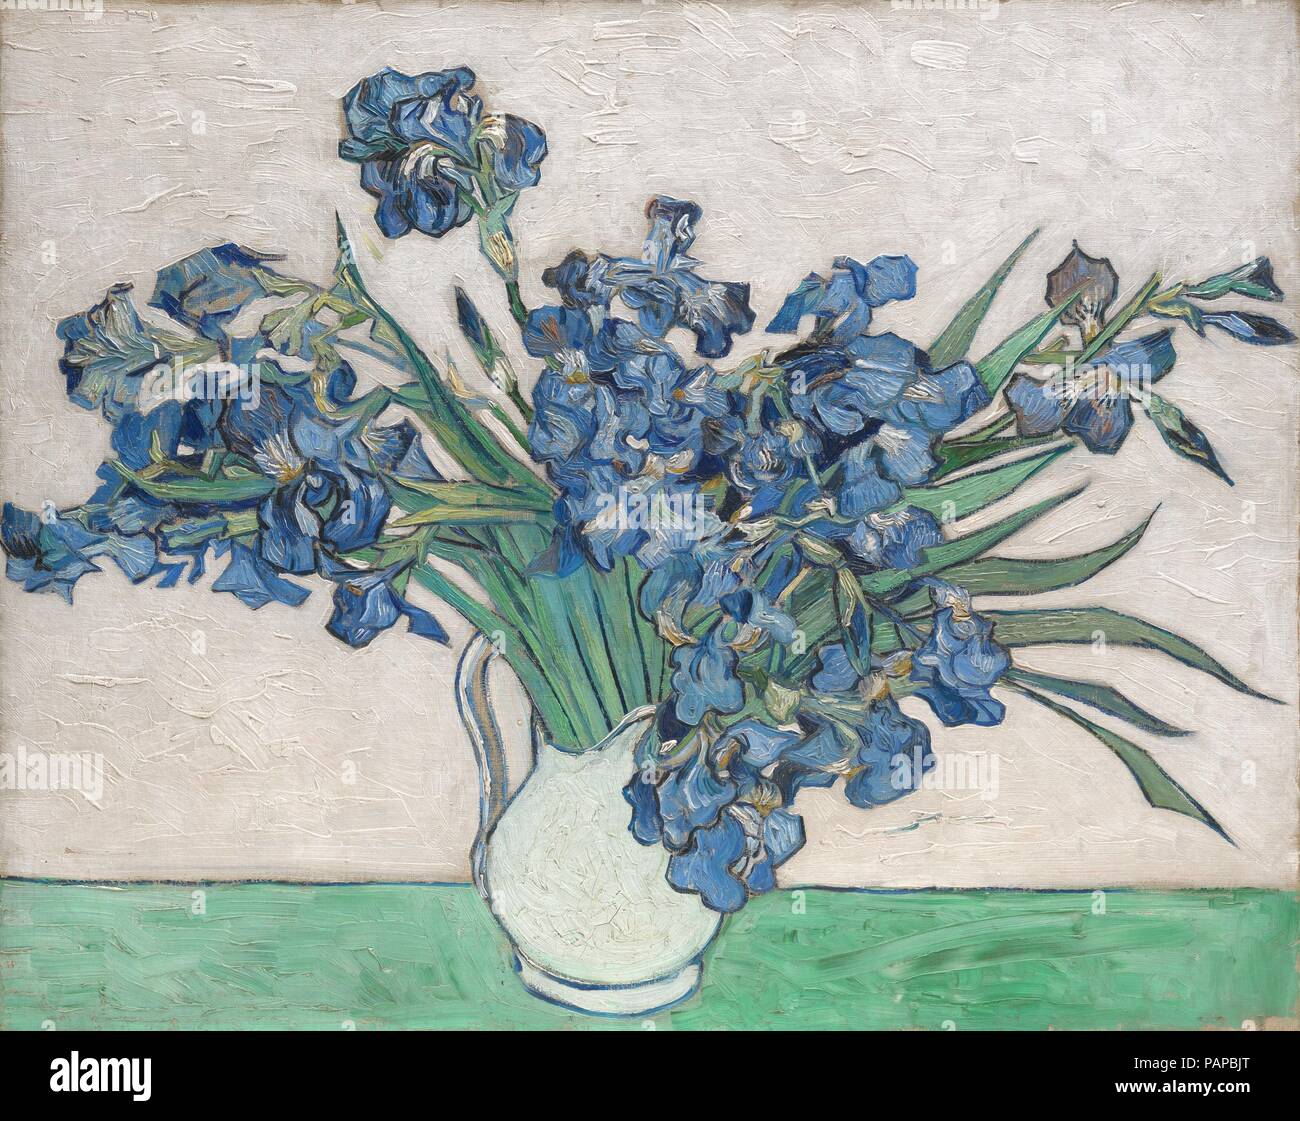 Irises. Artist: Vincent van Gogh (Dutch, Zundert 1853-1890 Auvers-sur-Oise). Dimensions: 29 x 36 1/4 in. (73.7 x 92.1 cm). Date: 1890.  In May 1890, just before he checked himself out of the asylum at Saint-Rémy, Van Gogh painted four exuberant bouquets of spring flowers, the only still lifes of any ambition he had undertaken during his yearlong stay: two of irises, two of roses, in contrasting color schemes and formats. In the Museum's <i>Irises</i> he sought a 'harmonious and soft' effect by placing the 'violet' flowers against a 'pink background,' which have since faded owing to his use of  Stock Photo